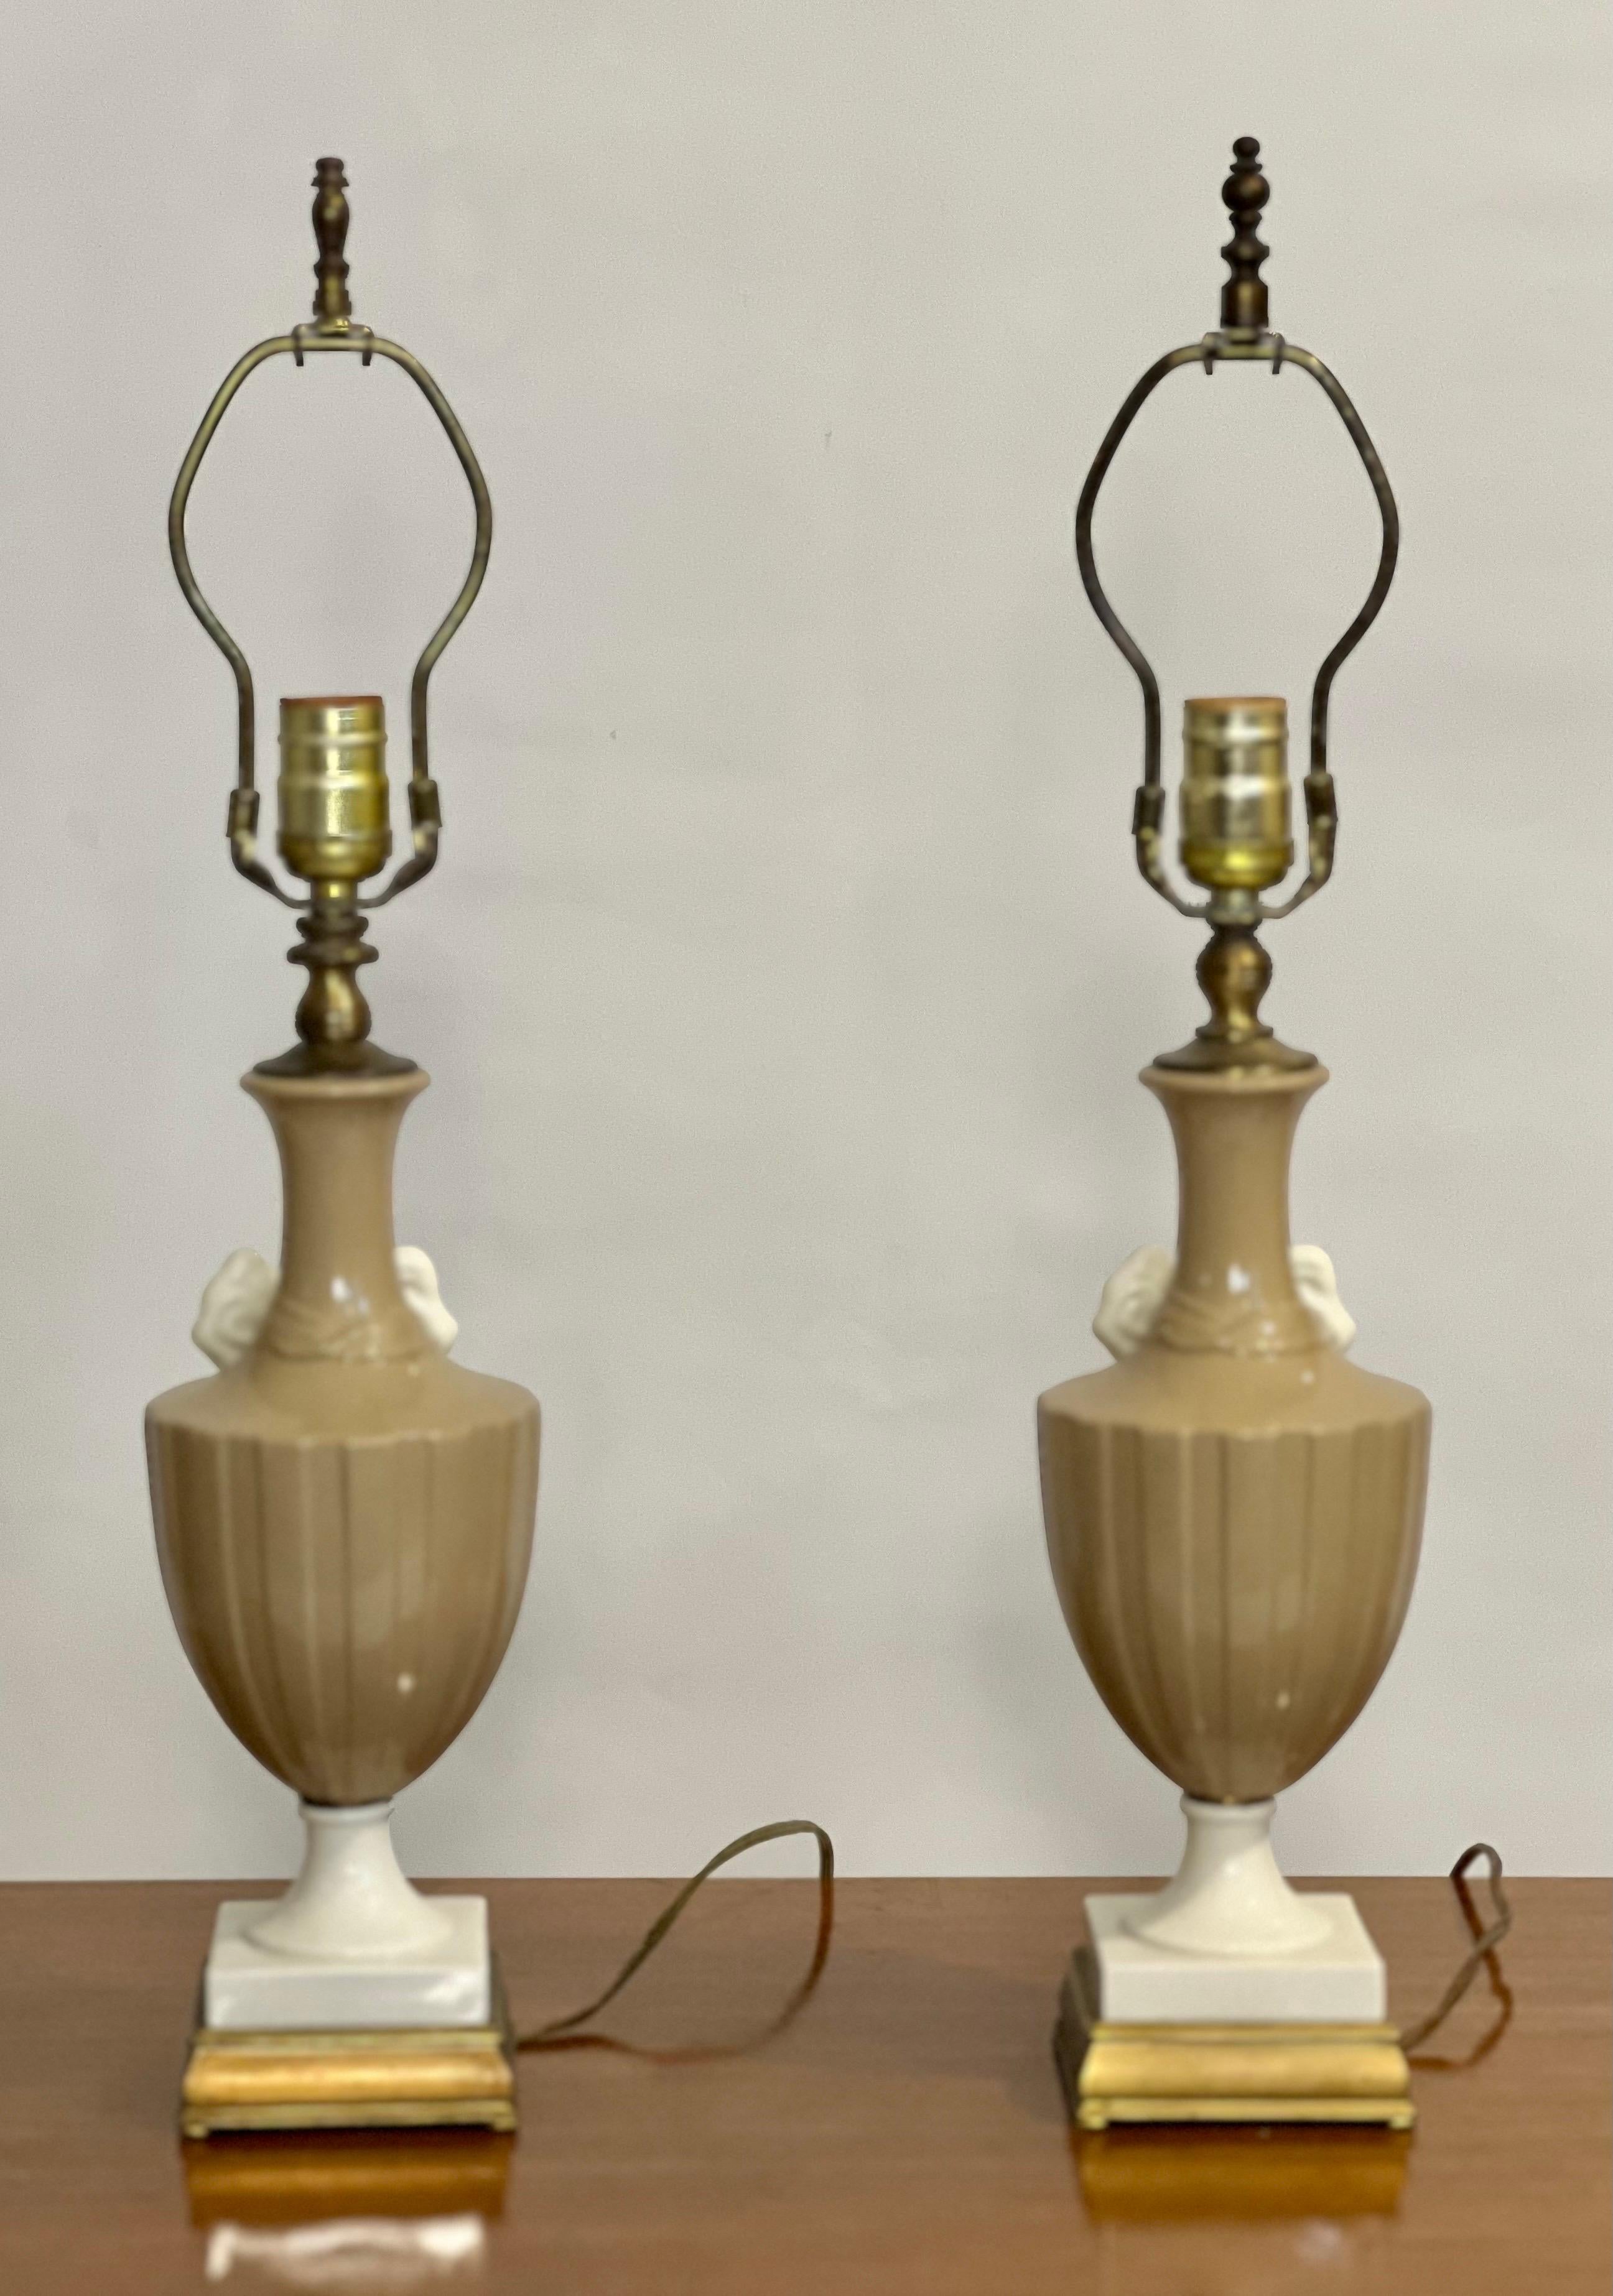 North American 20th Century Lenox Porcelain Lamps in Taupe and White by Dav Art, NY, Pair For Sale